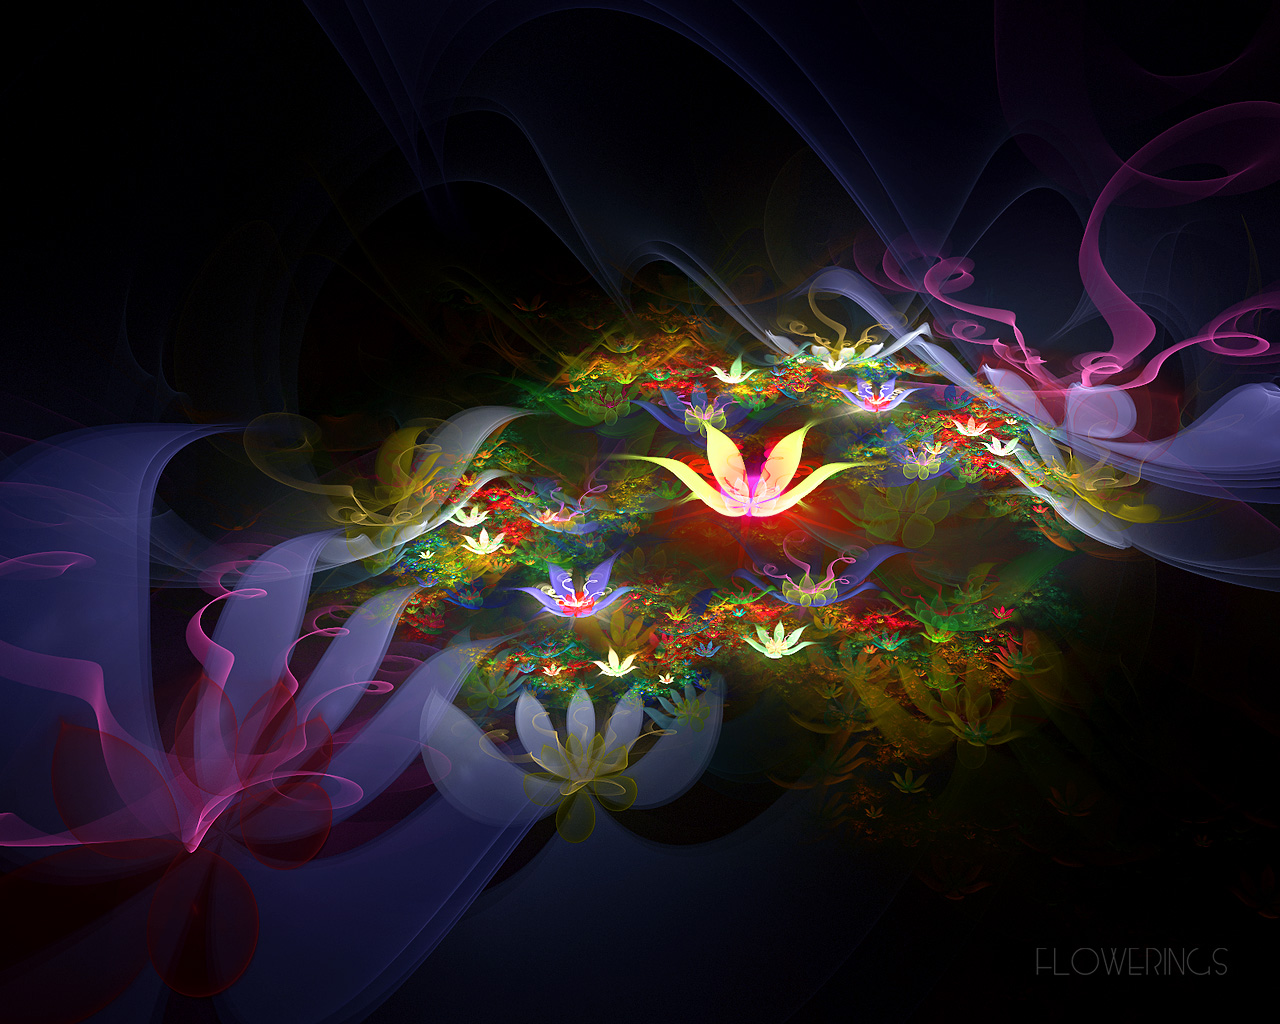 45 amazing 3d wallpapers insite flower 3d free computer wallpapers 1280x1024